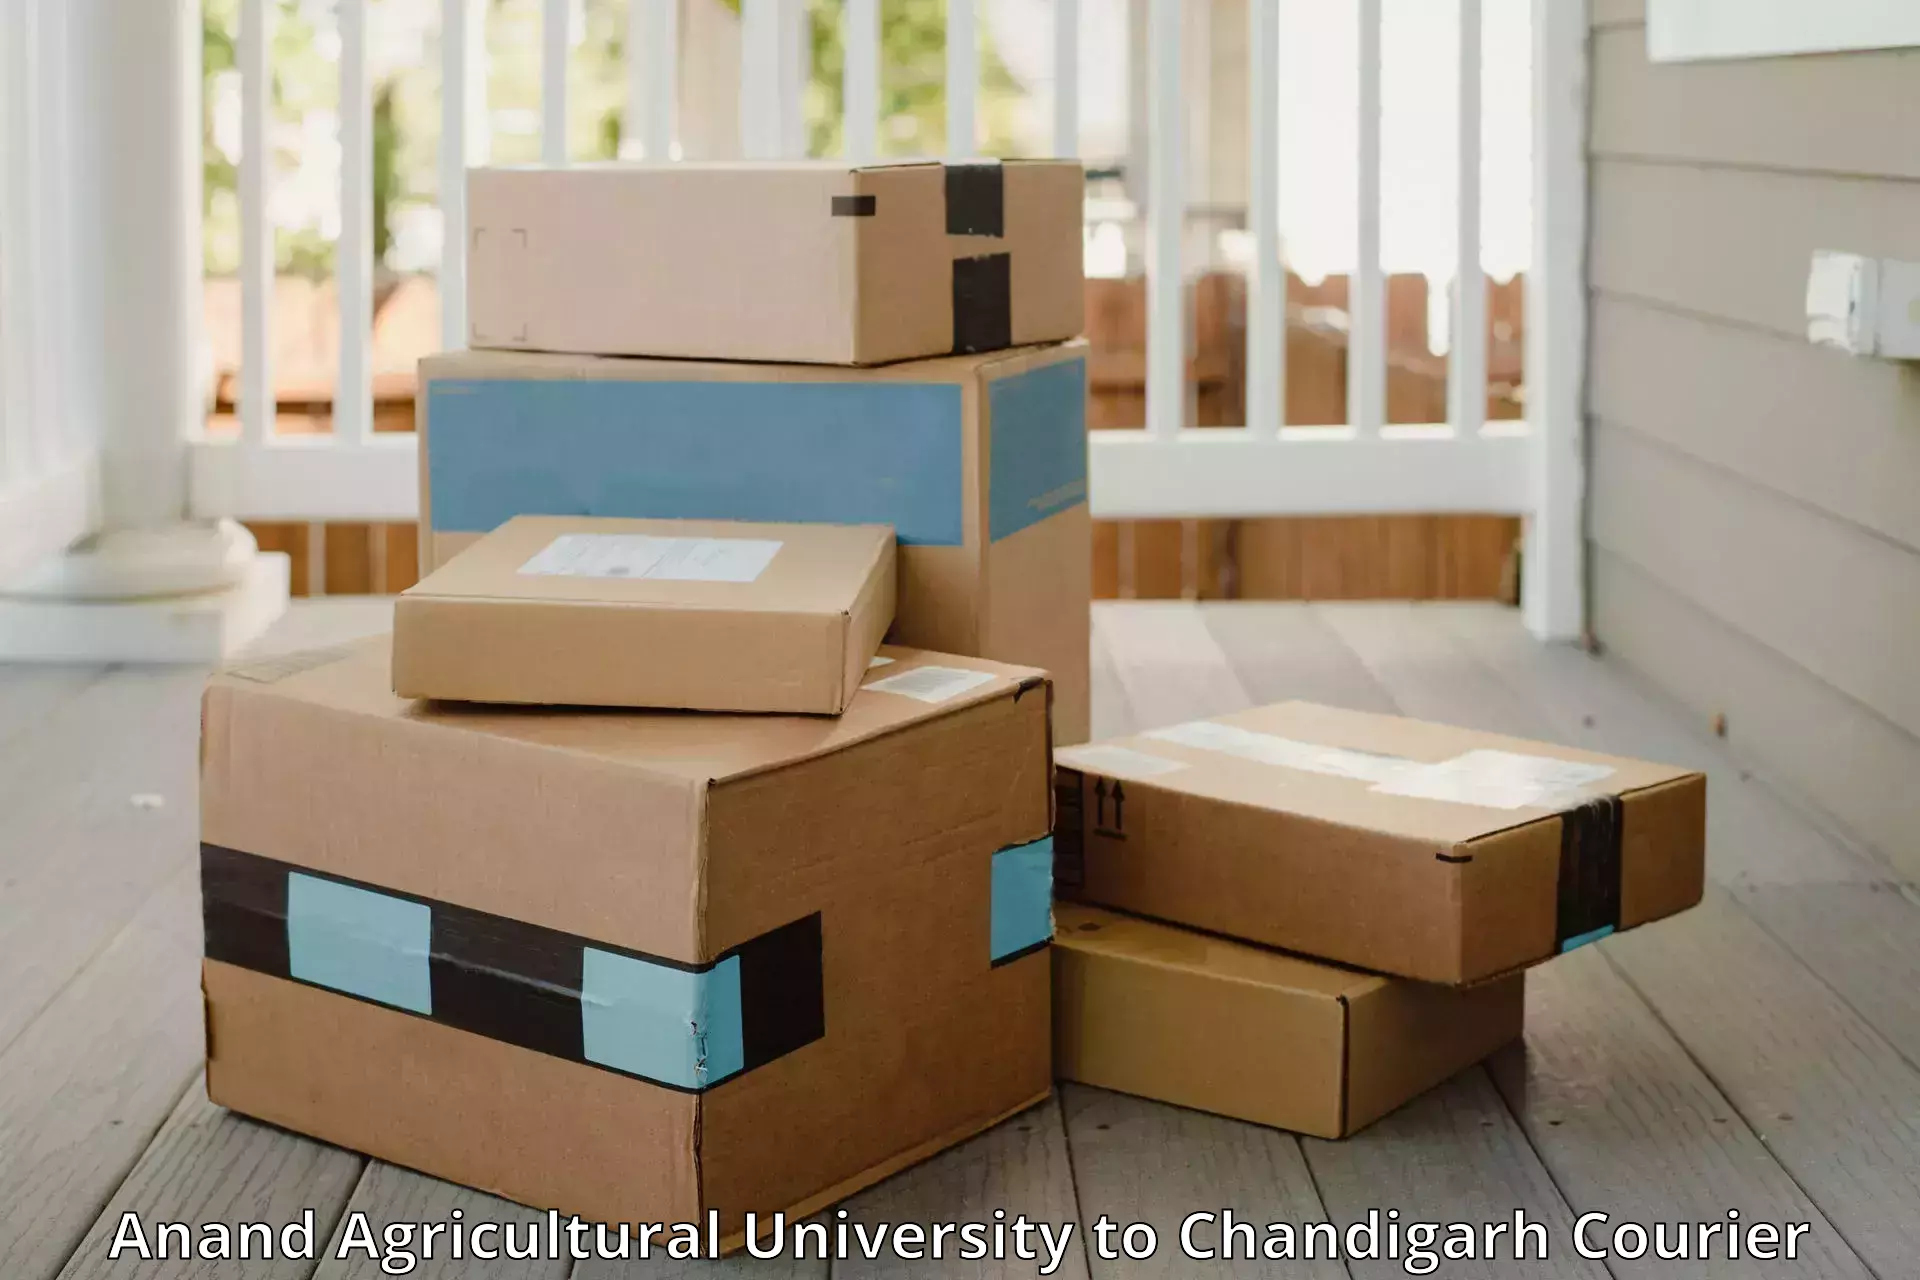 Online luggage shipping booking Anand Agricultural University to Panjab University Chandigarh